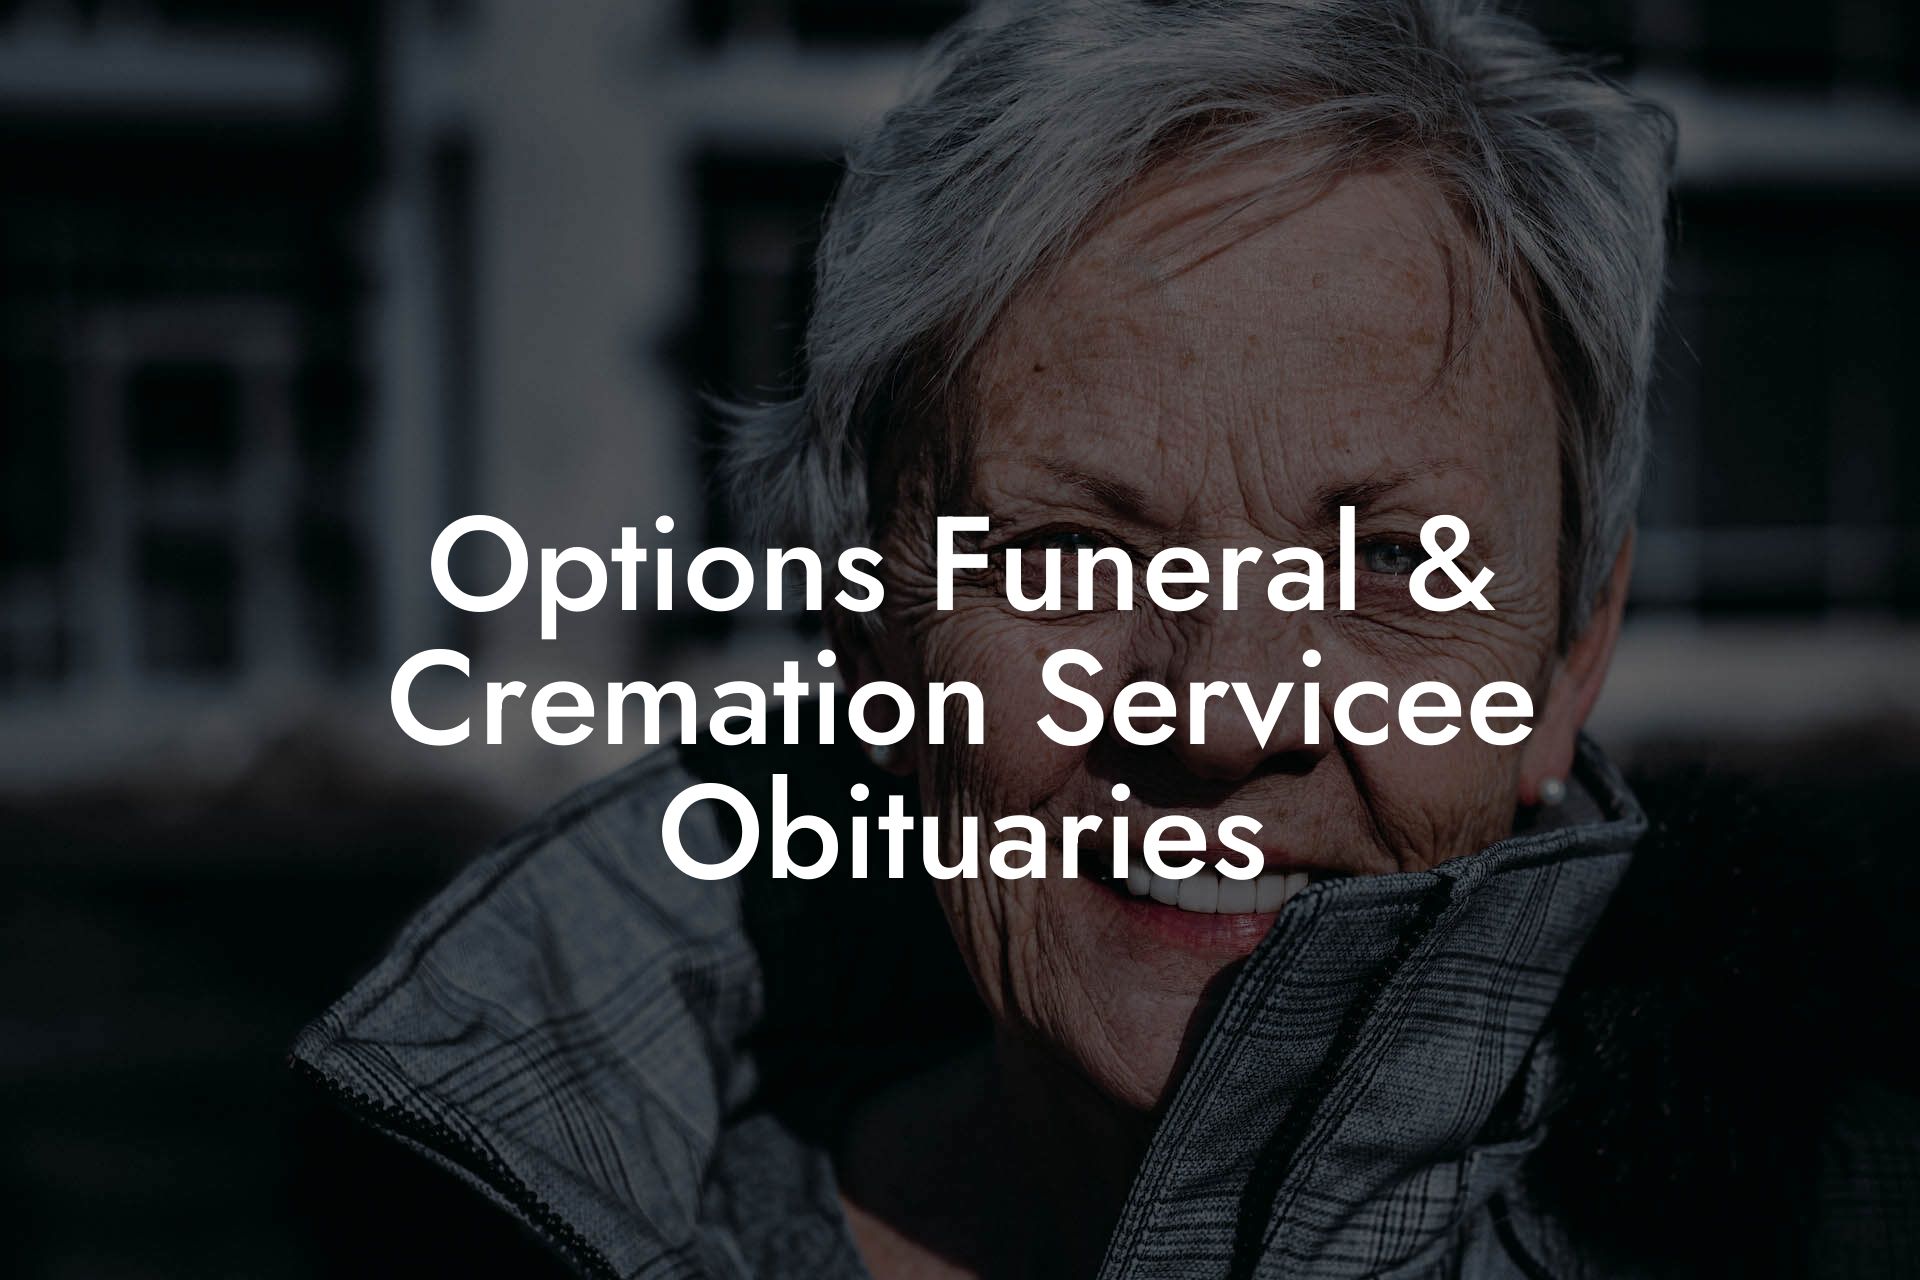 Options Funeral & Cremation Servicee Obituaries